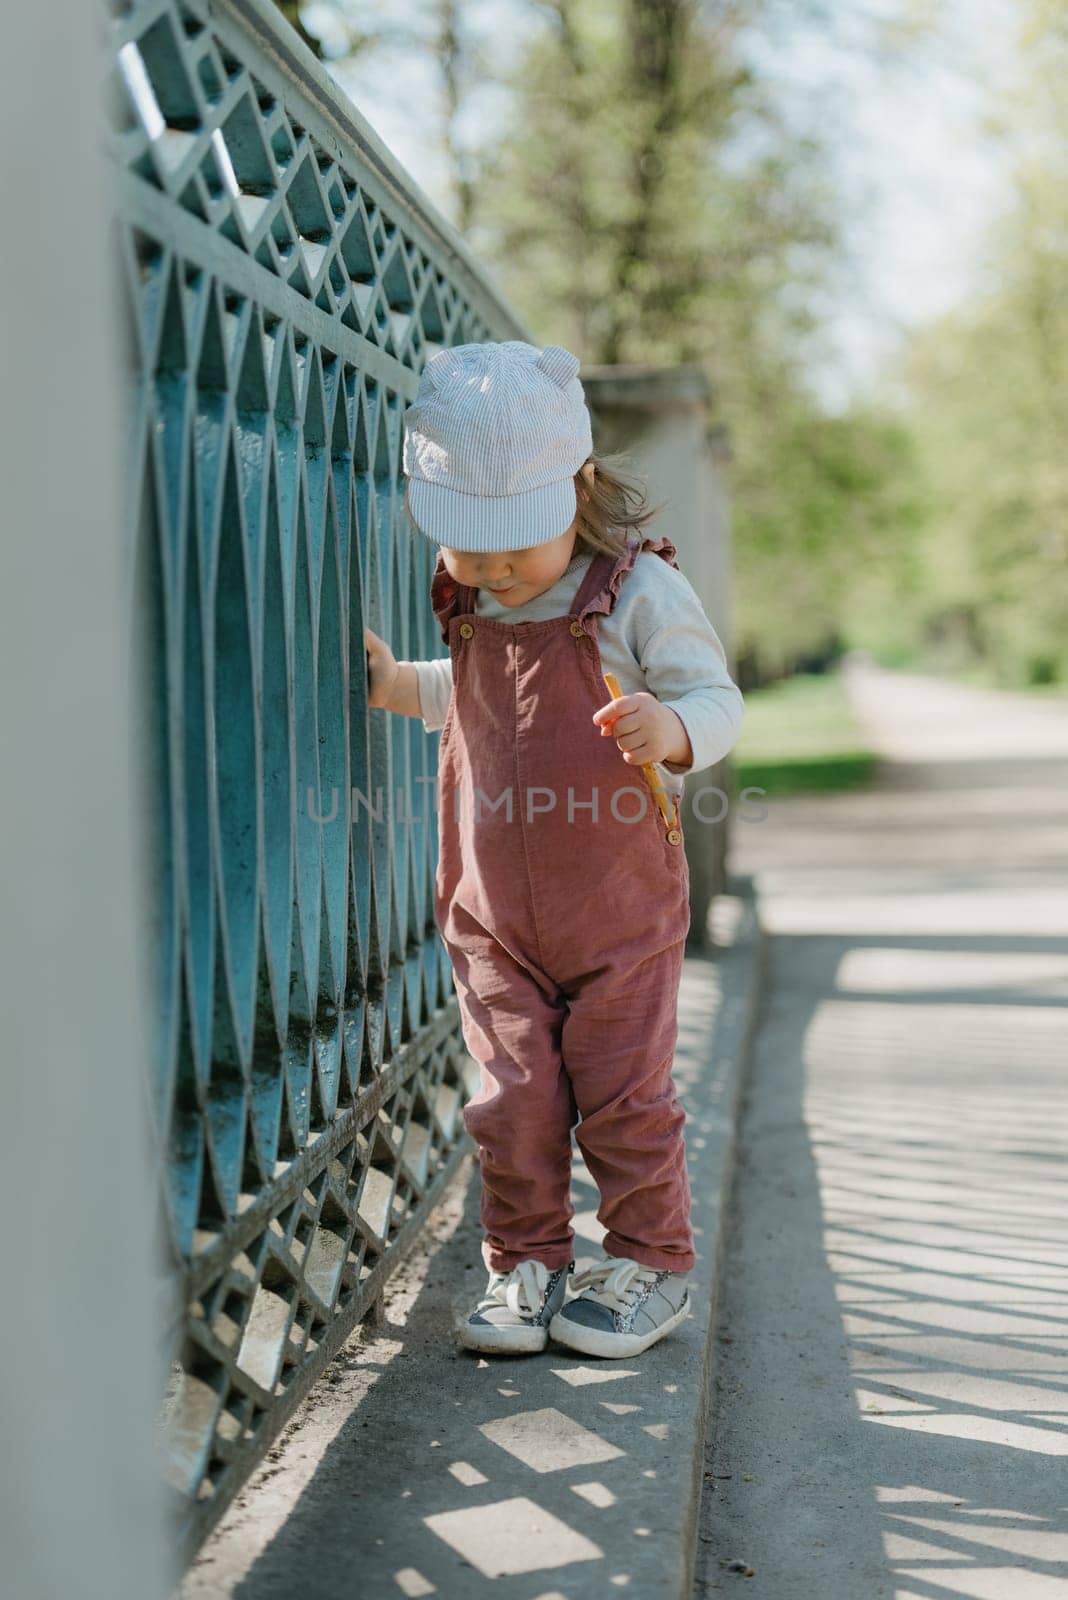 A female toddler eats a sausage close to the garden bridge fence. A baby girl in a cap and velvet overall walks in the park.